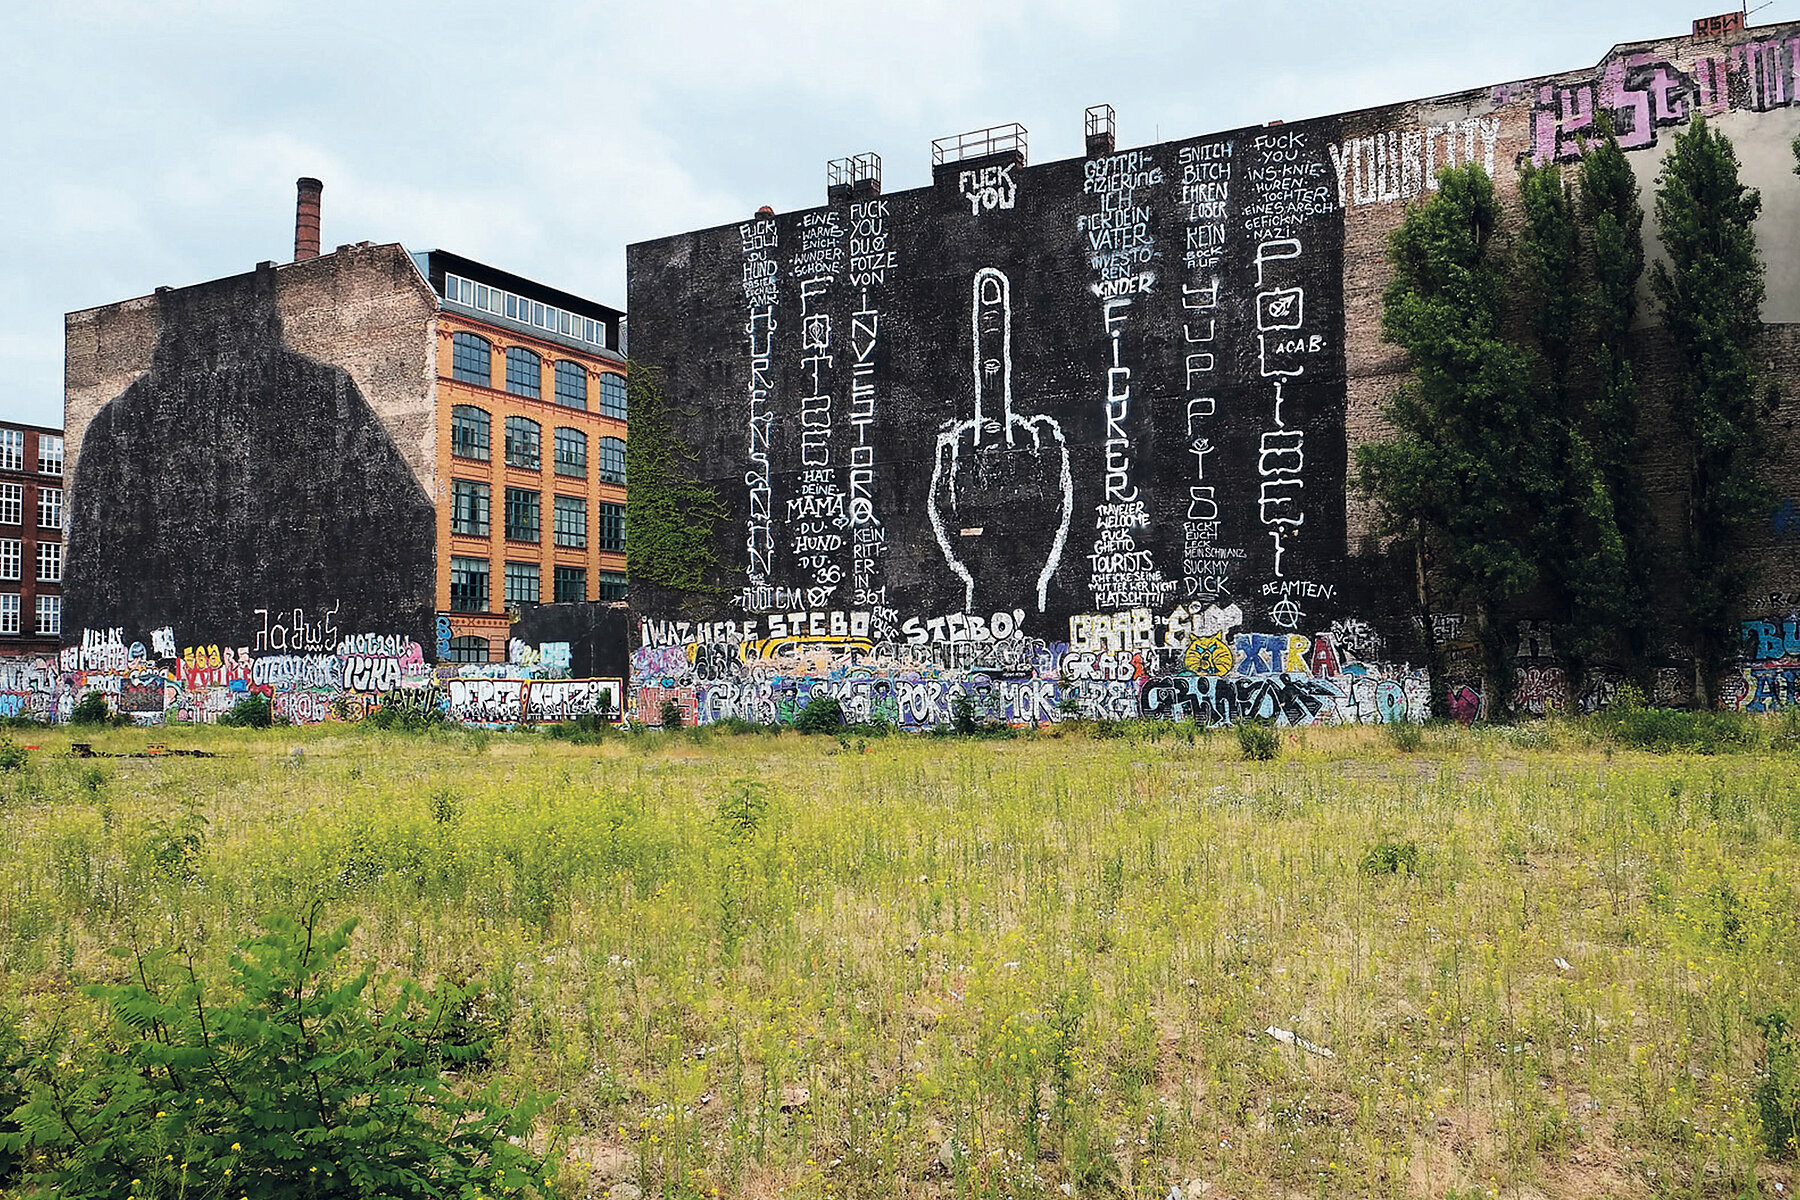 Meadow on the Cuvry wasteland. In the background, two house walls with murals painted over in black. The right-hand picture shows a hand drawn in white on the black surface, stretching its middle finger upwards.